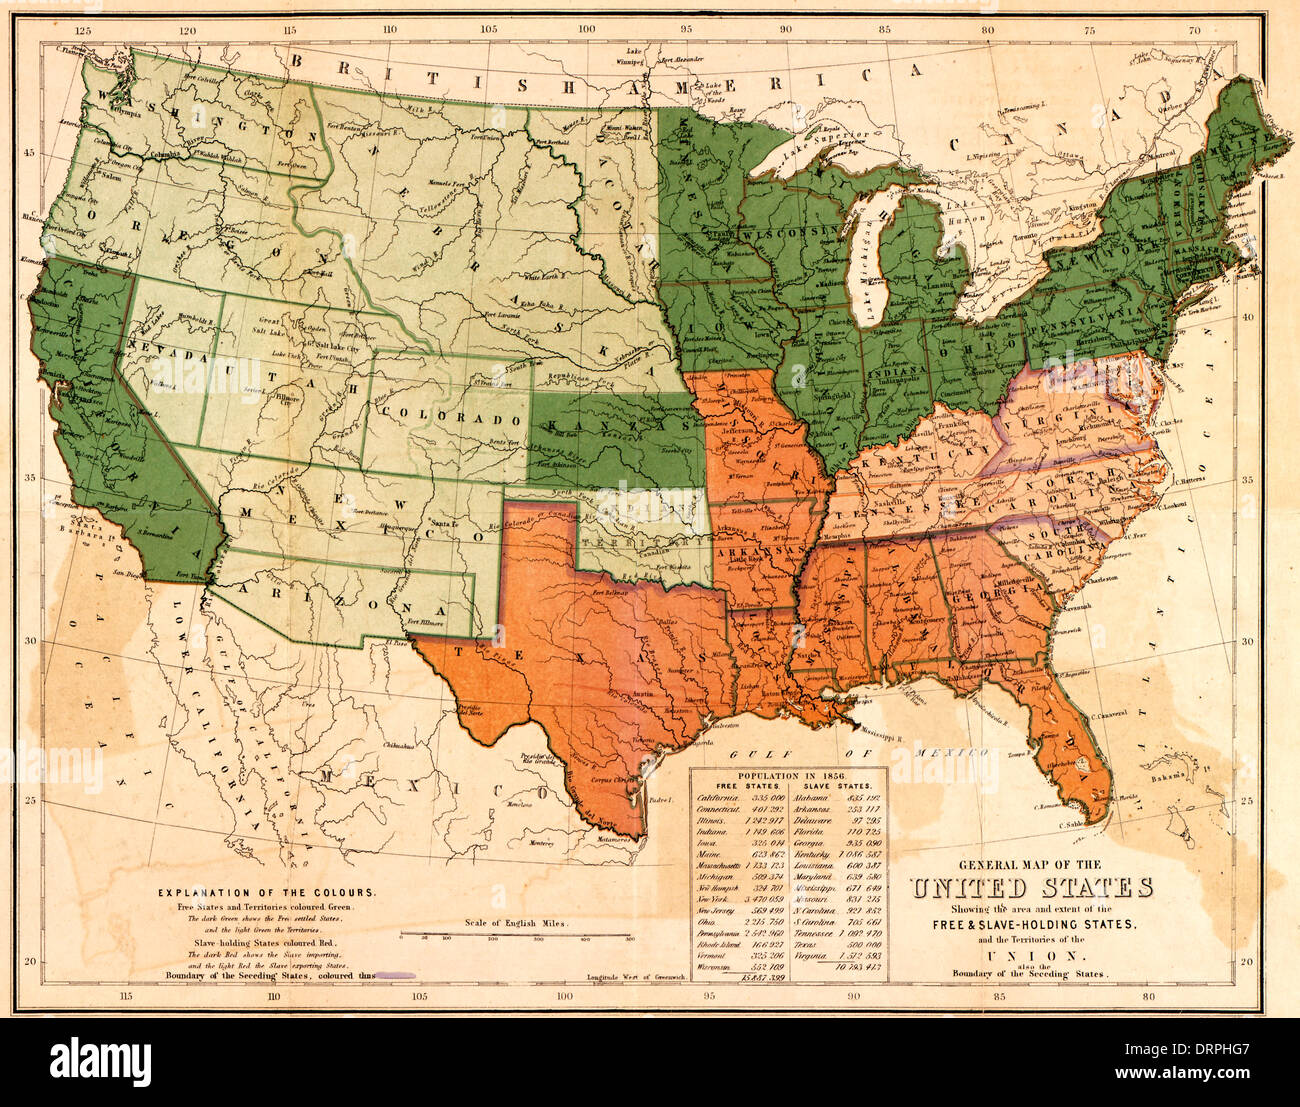 America Map 1861 Stock Photos America Map 1861 Stock Images Alamy